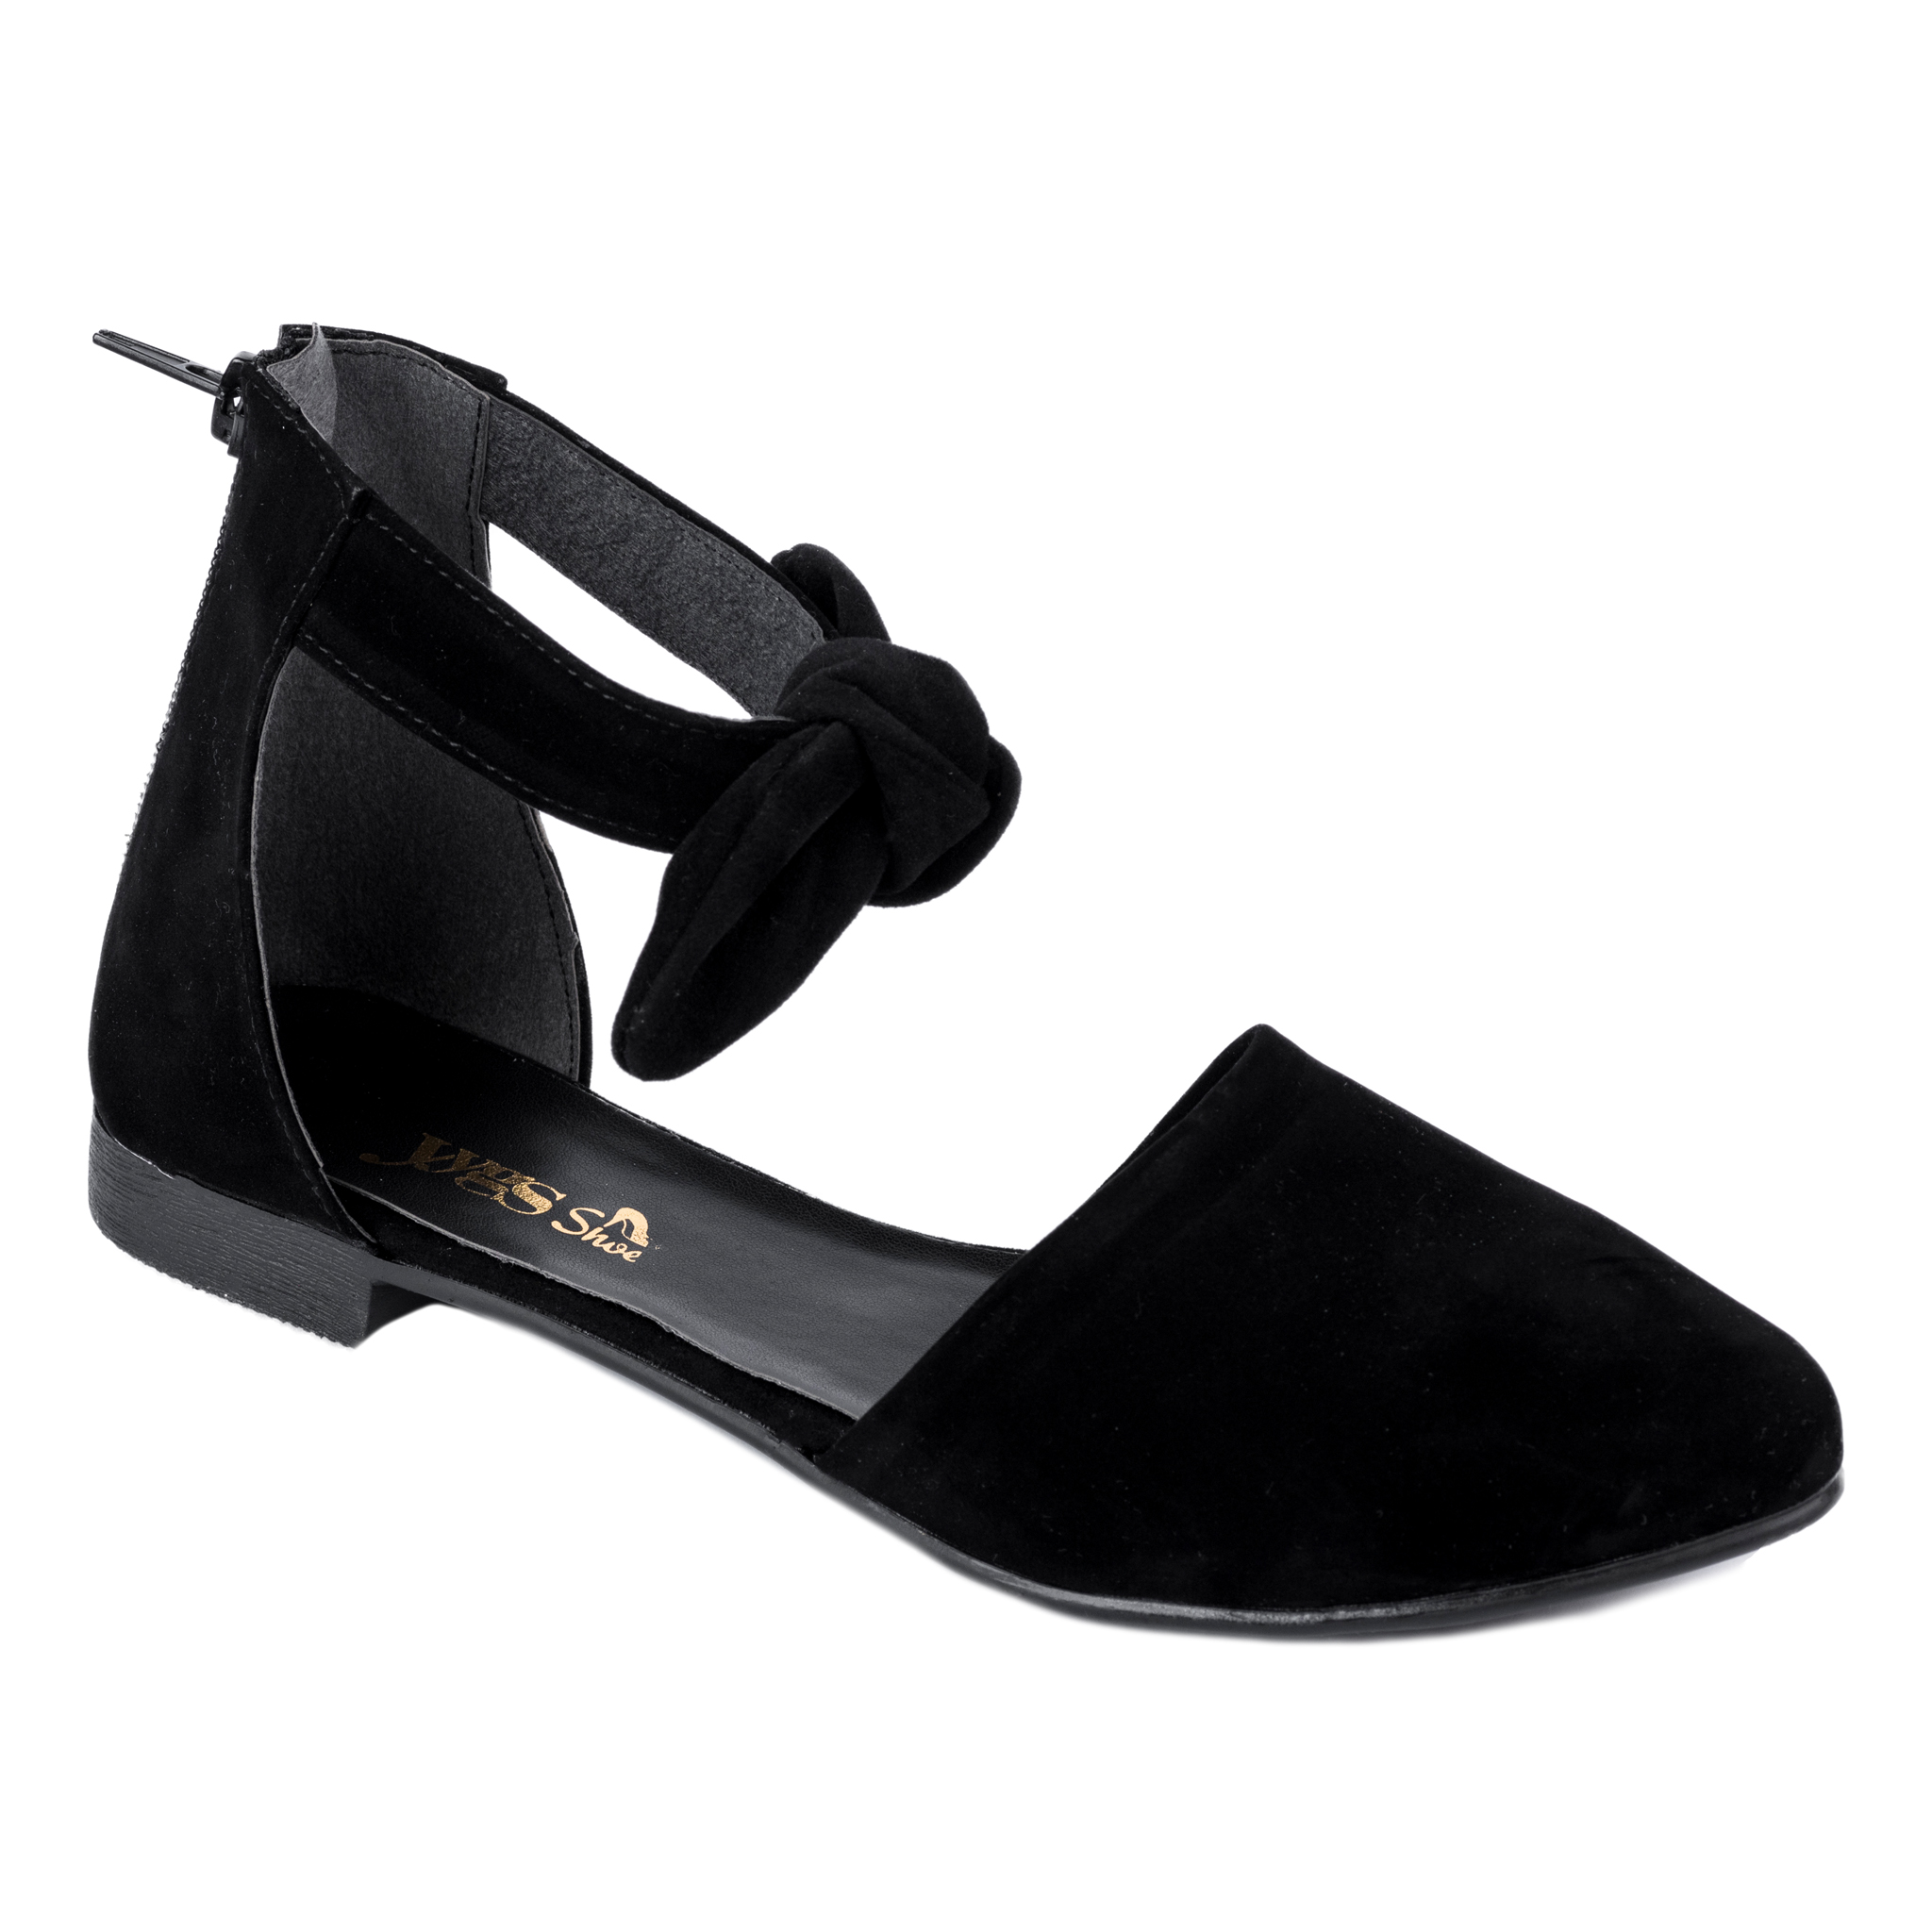 VELOUR FLATS WITH BOW - BLACK